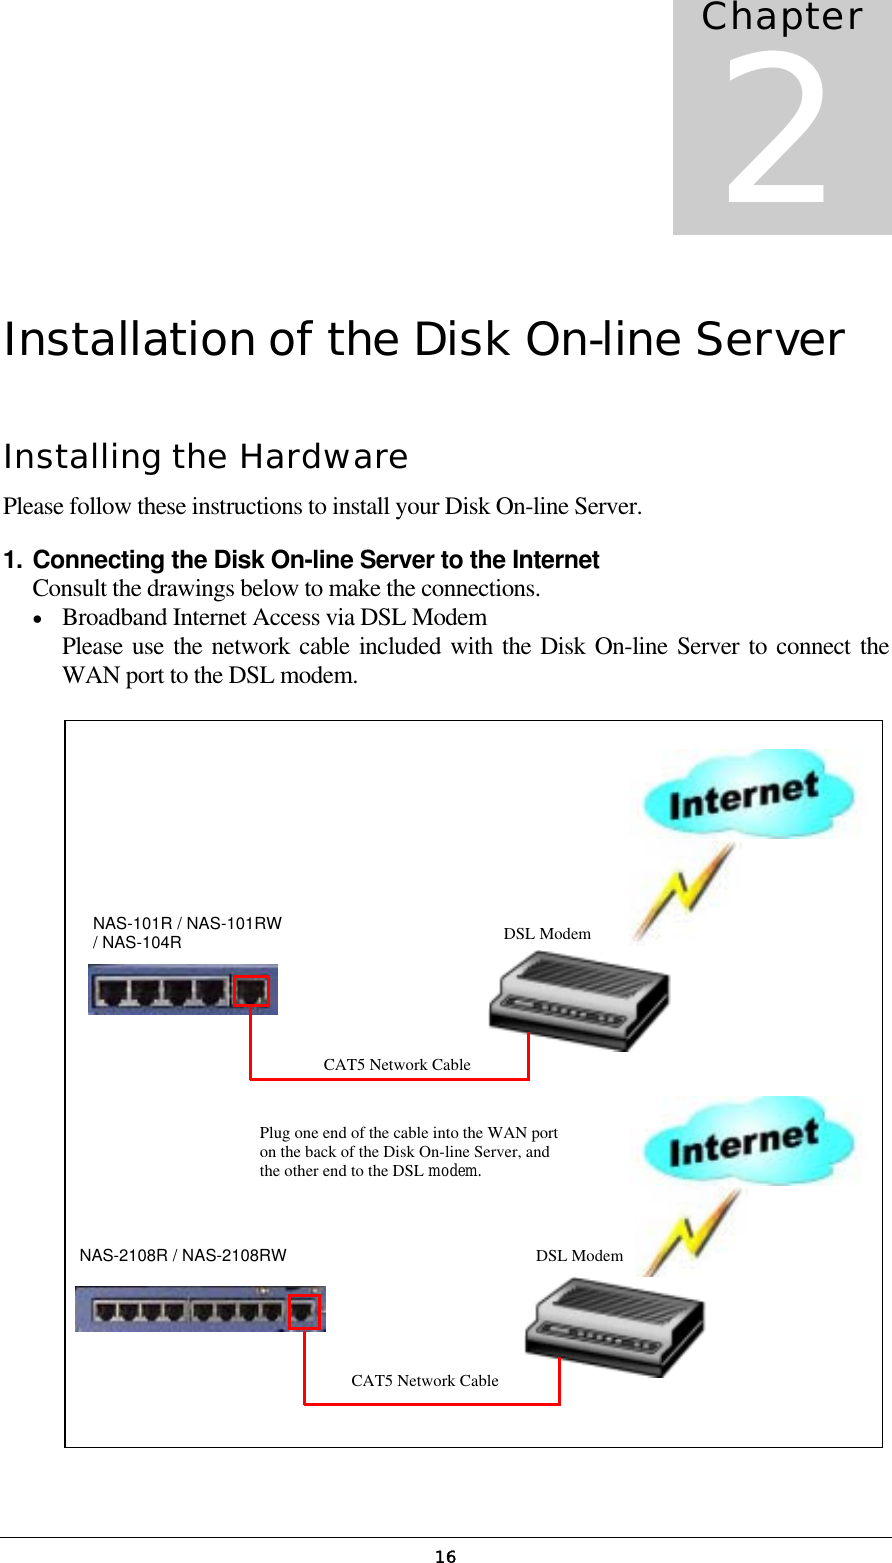   16Installation of the Disk On-line Server Installing the Hardware Please follow these instructions to install your Disk On-line Server. 1. Connecting the Disk On-line Server to the Internet Consult the drawings below to make the connections. •  Broadband Internet Access via DSL Modem Please use the network cable included with the Disk On-line Server to connect the WAN port to the DSL modem.                          Chapter 2 DSL ModemNAS-101R / NAS-101RW / NAS-104R NAS-2108R / NAS-2108RW   DSL ModemCAT5 Network Cable CAT5 Network Cable Plug one end of the cable into the WAN port on the back of the Disk On-line Server, and the other end to the DSL modem. 